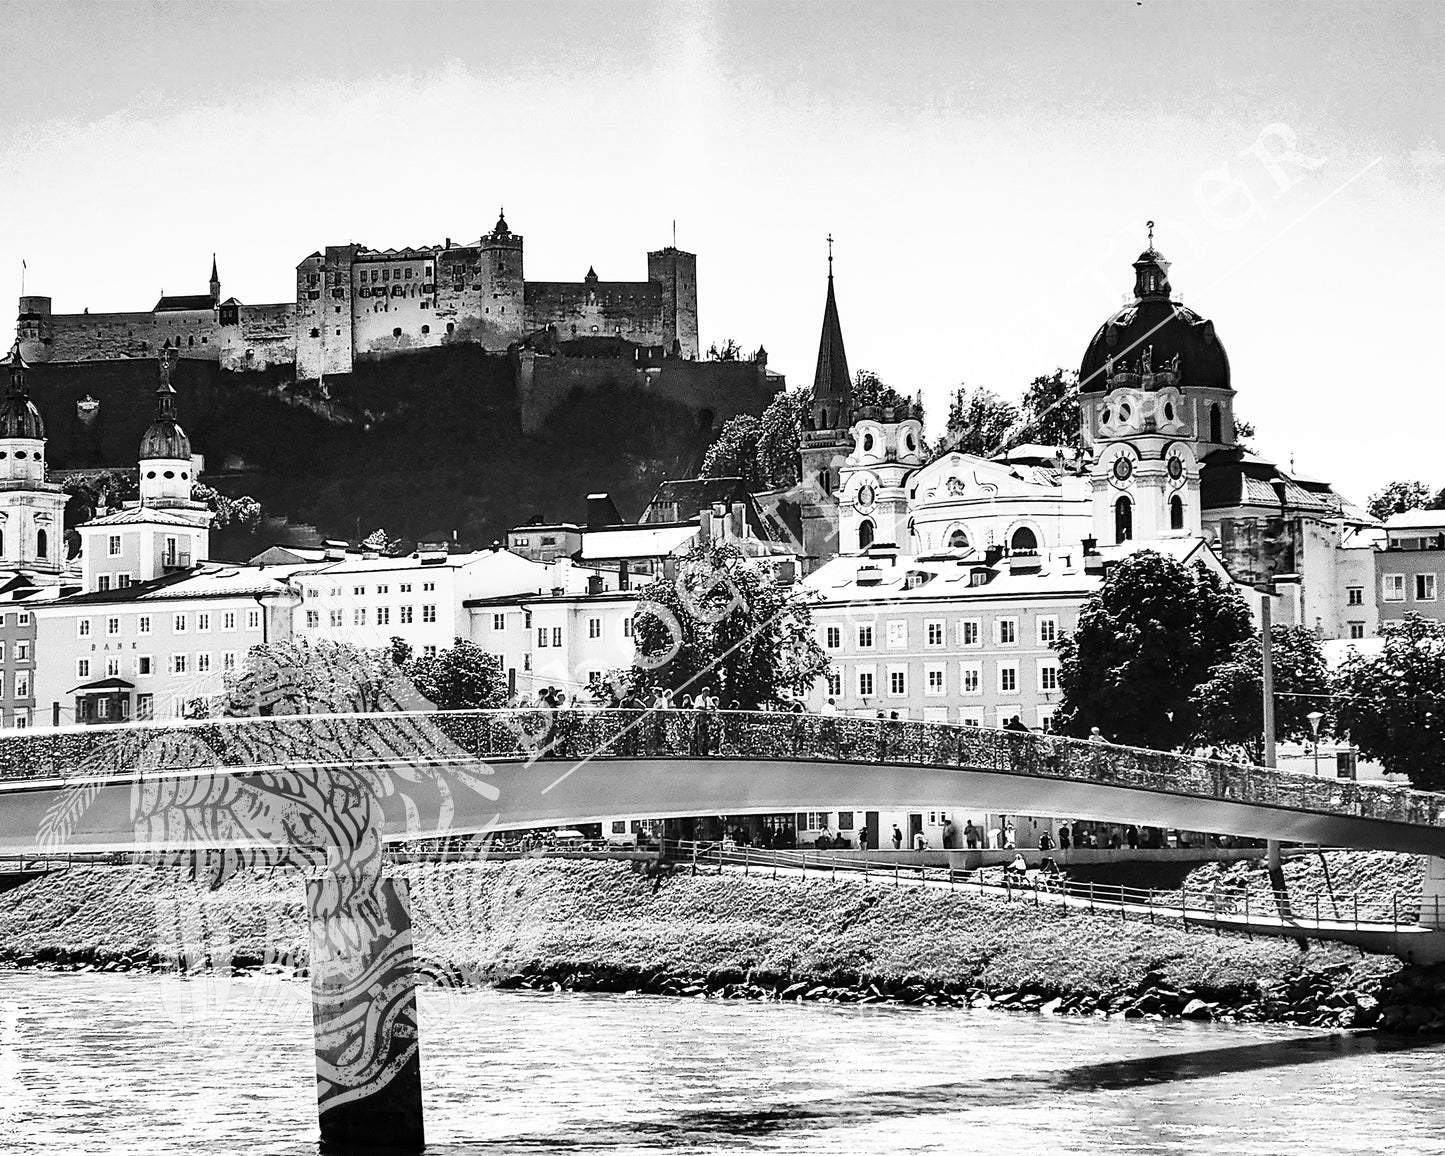 Travel photography. Gifts for history lovers and travelers. Black and white photograph of Salzburg Austria with castle in background.